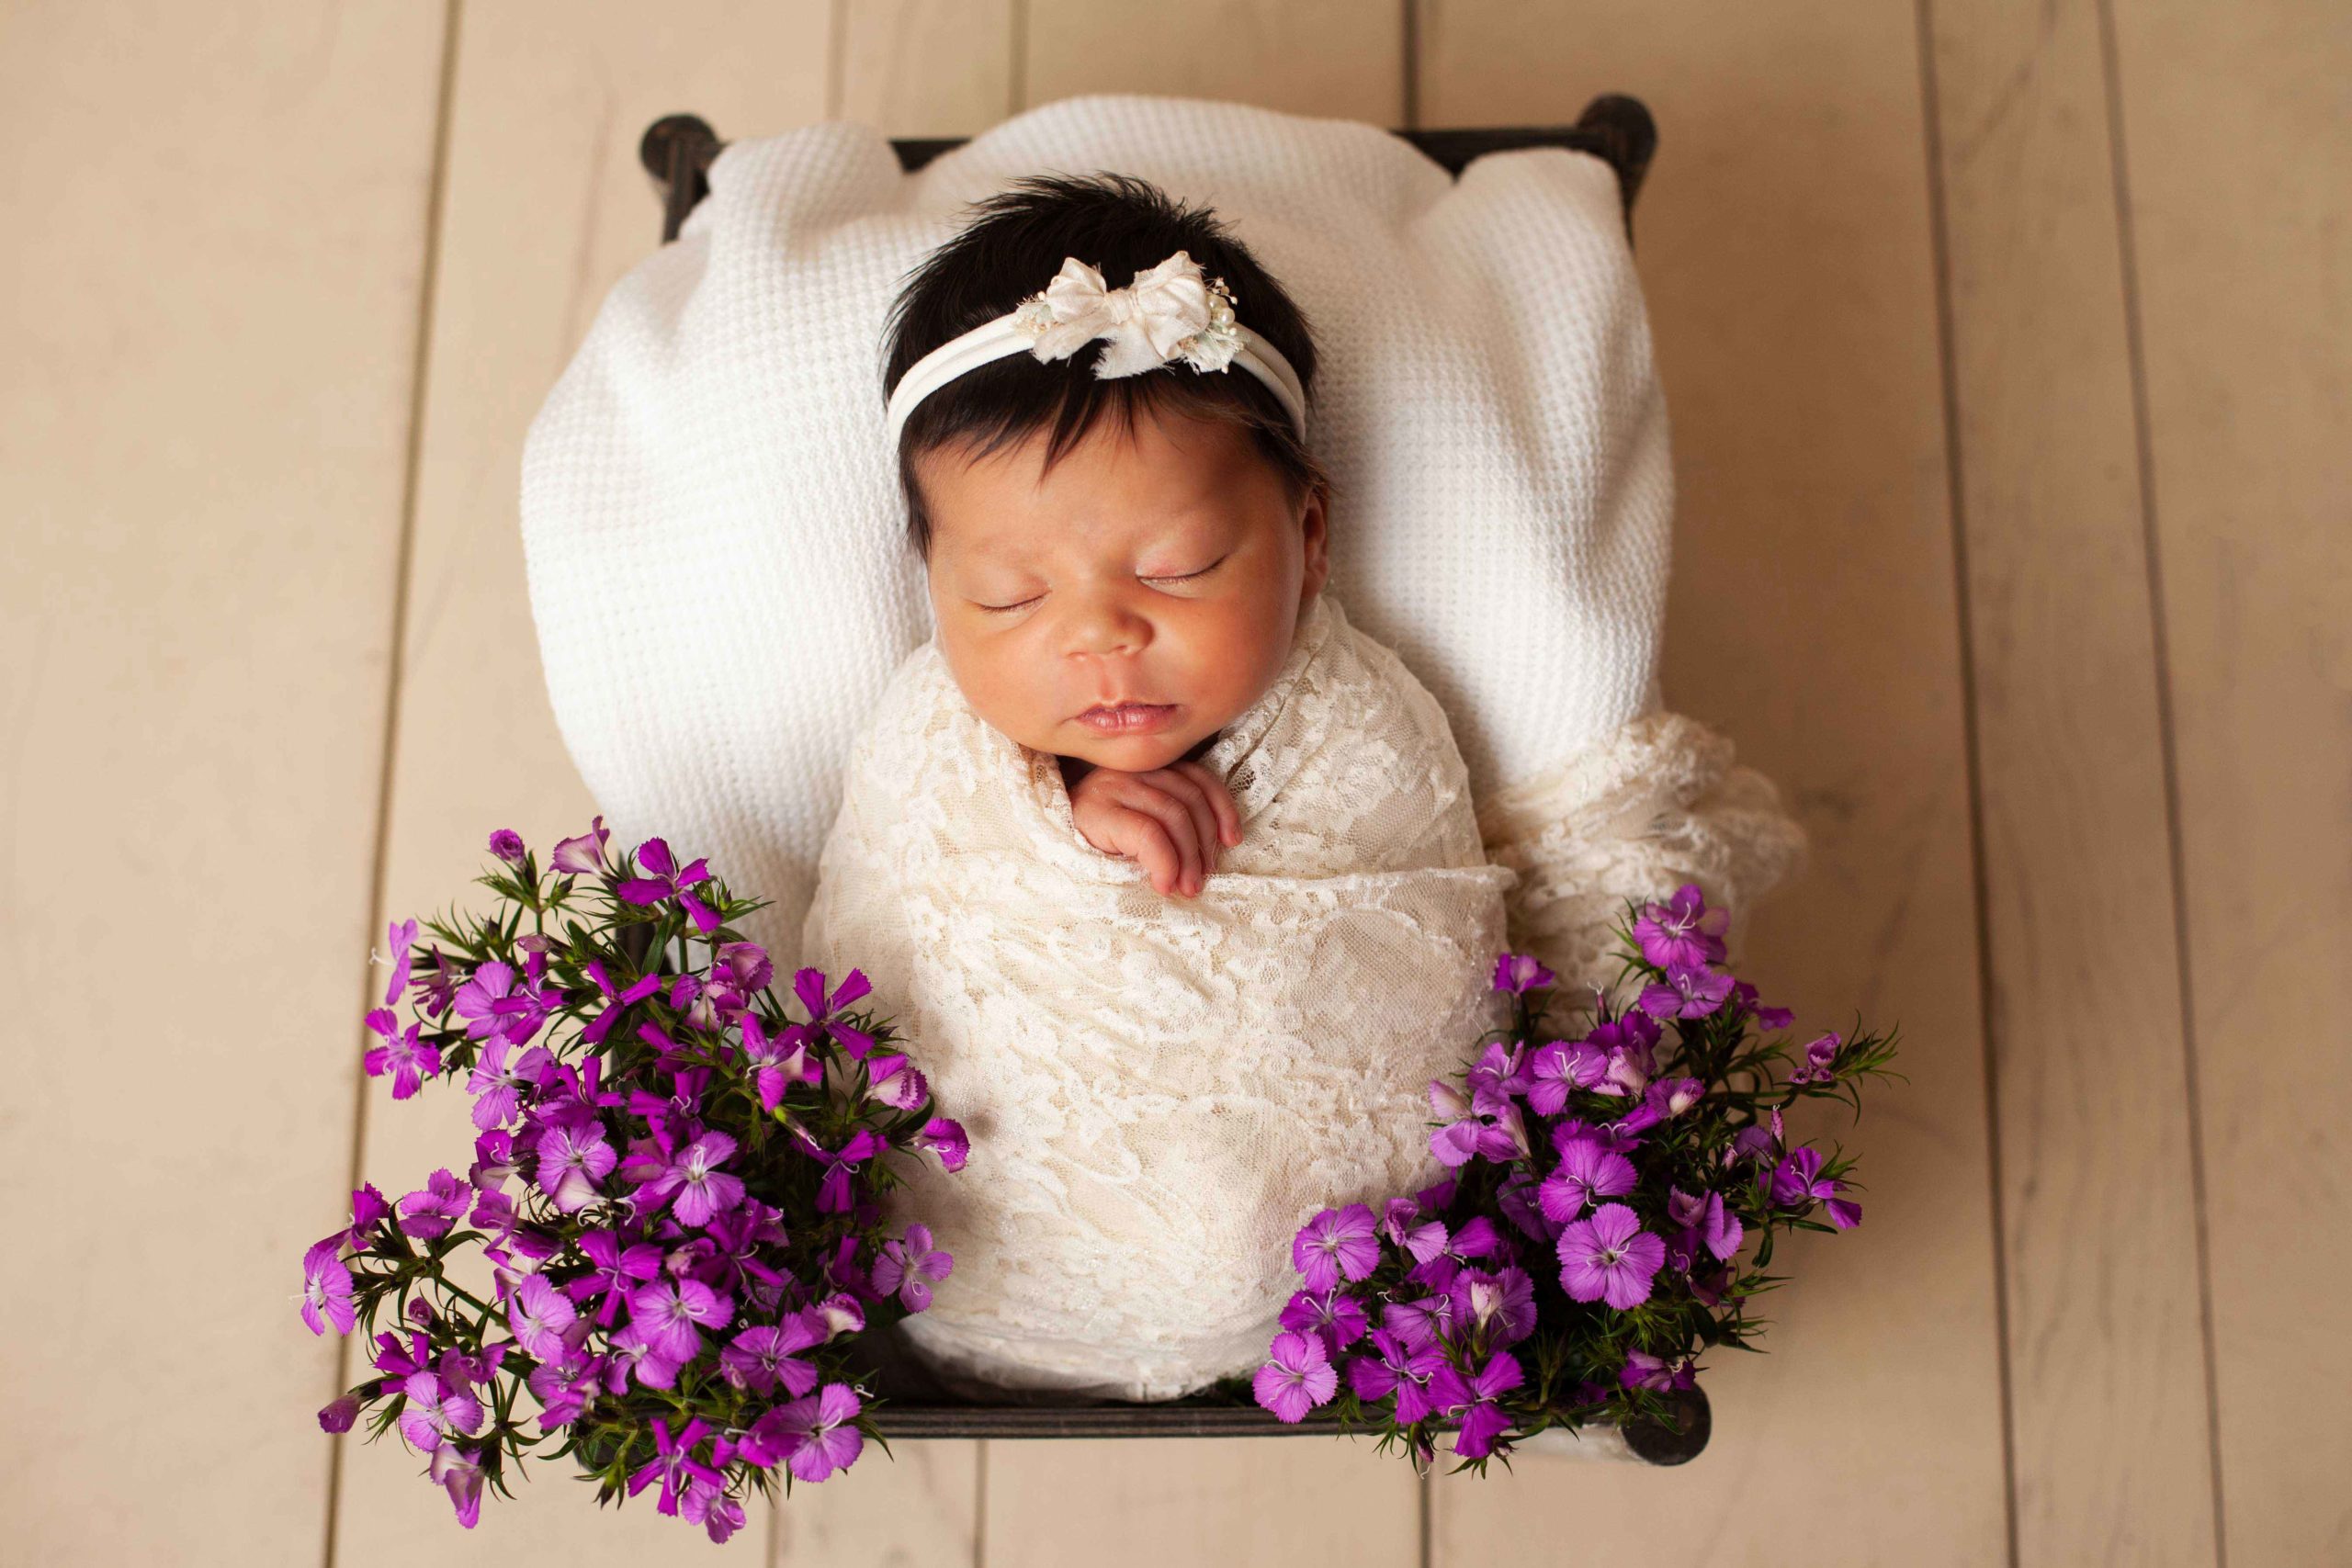 When considering a newborn photographer think of safety, style, and cost